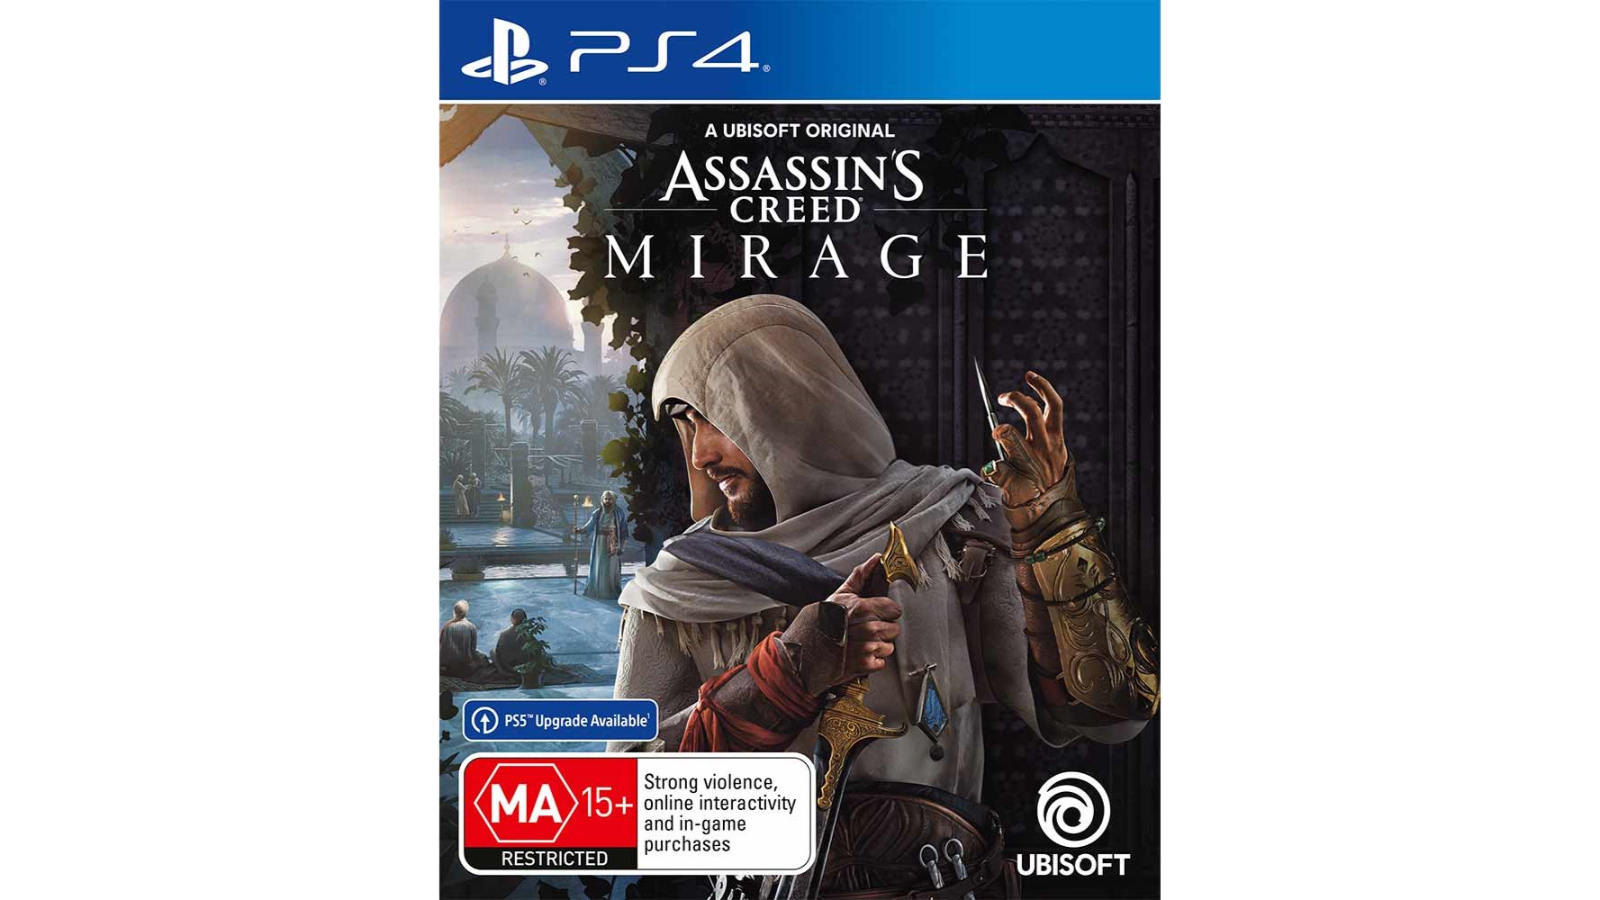 Assassin's Creed Legendary Collection on PS4 — price history, screenshots,  discounts • USA